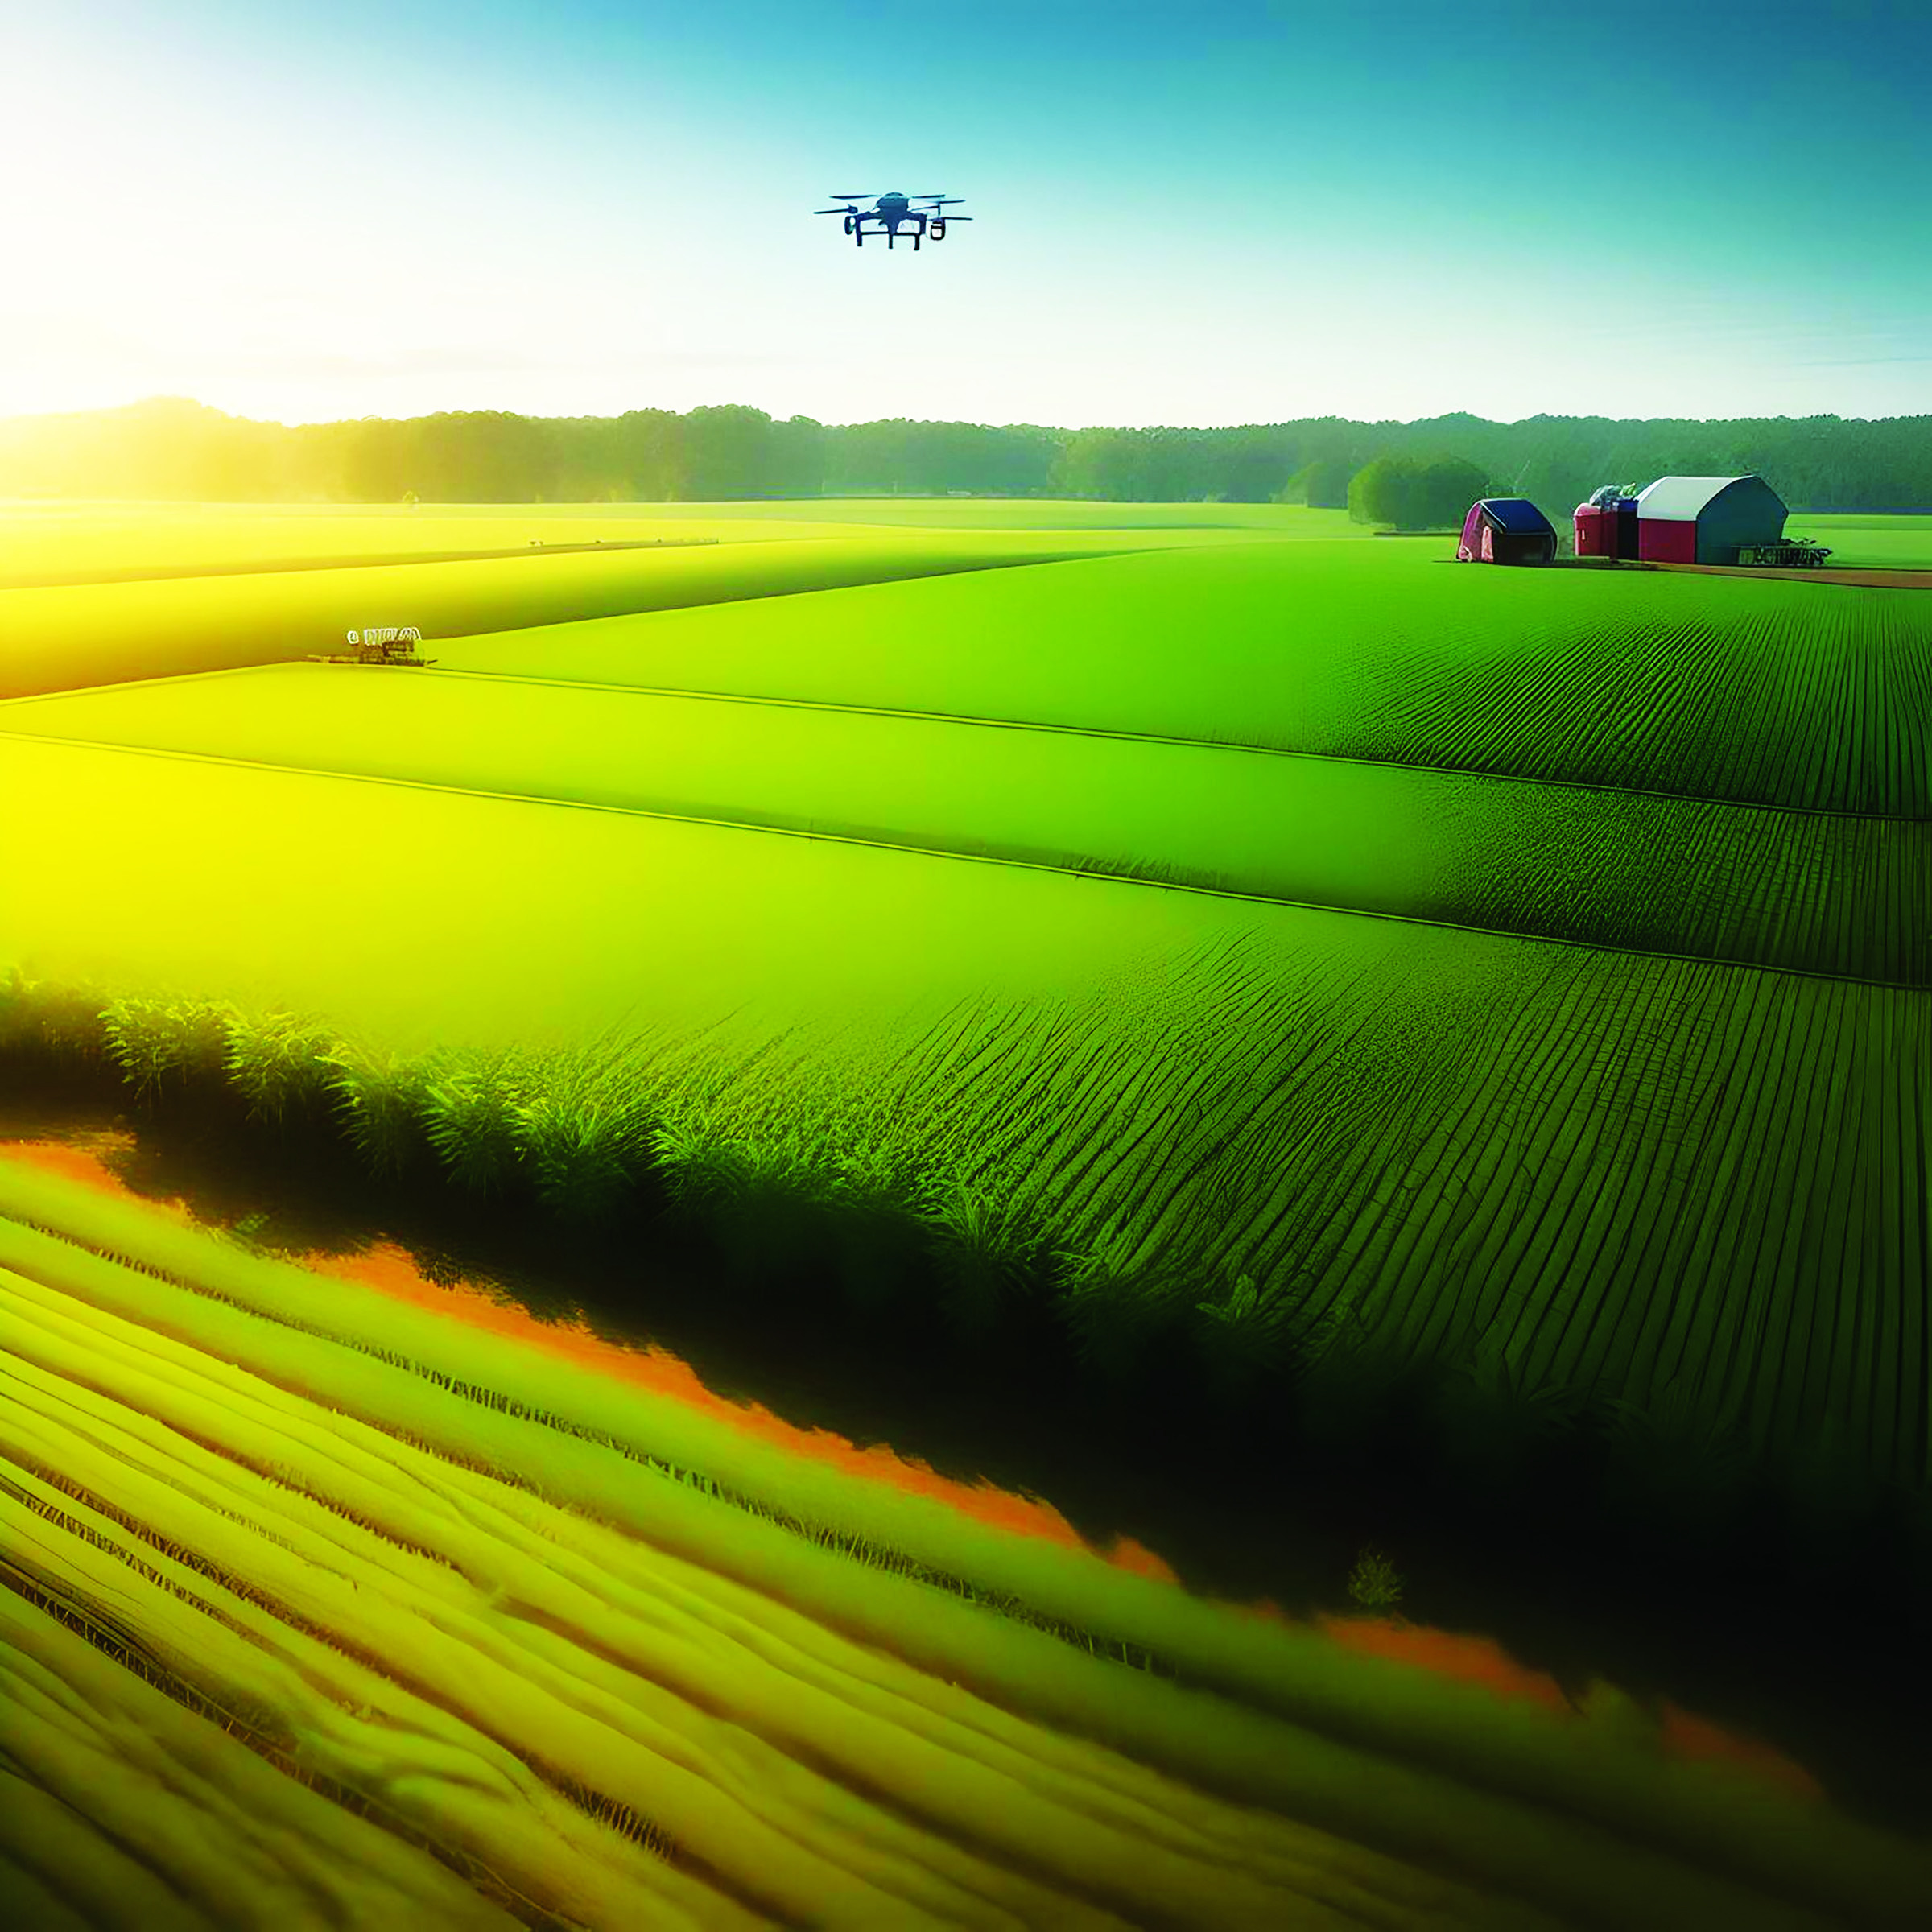 ◄ An AI image generator created this photo of an AI powered drone watching crops on a farm.